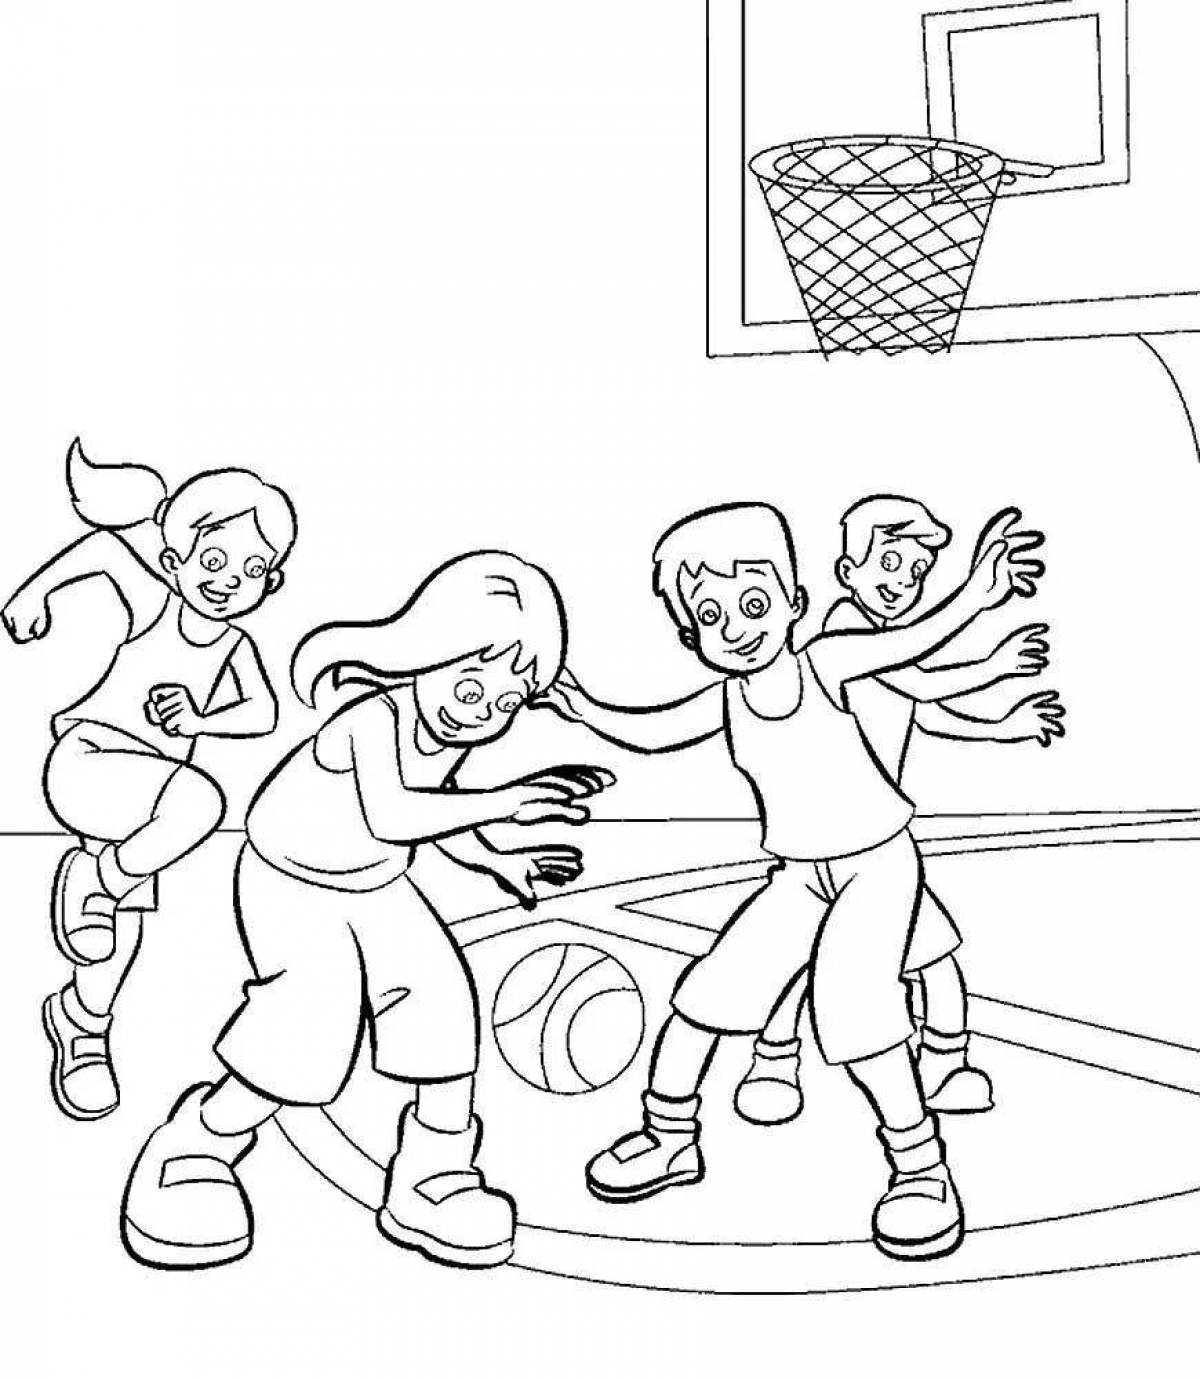 Playful health and sports coloring book